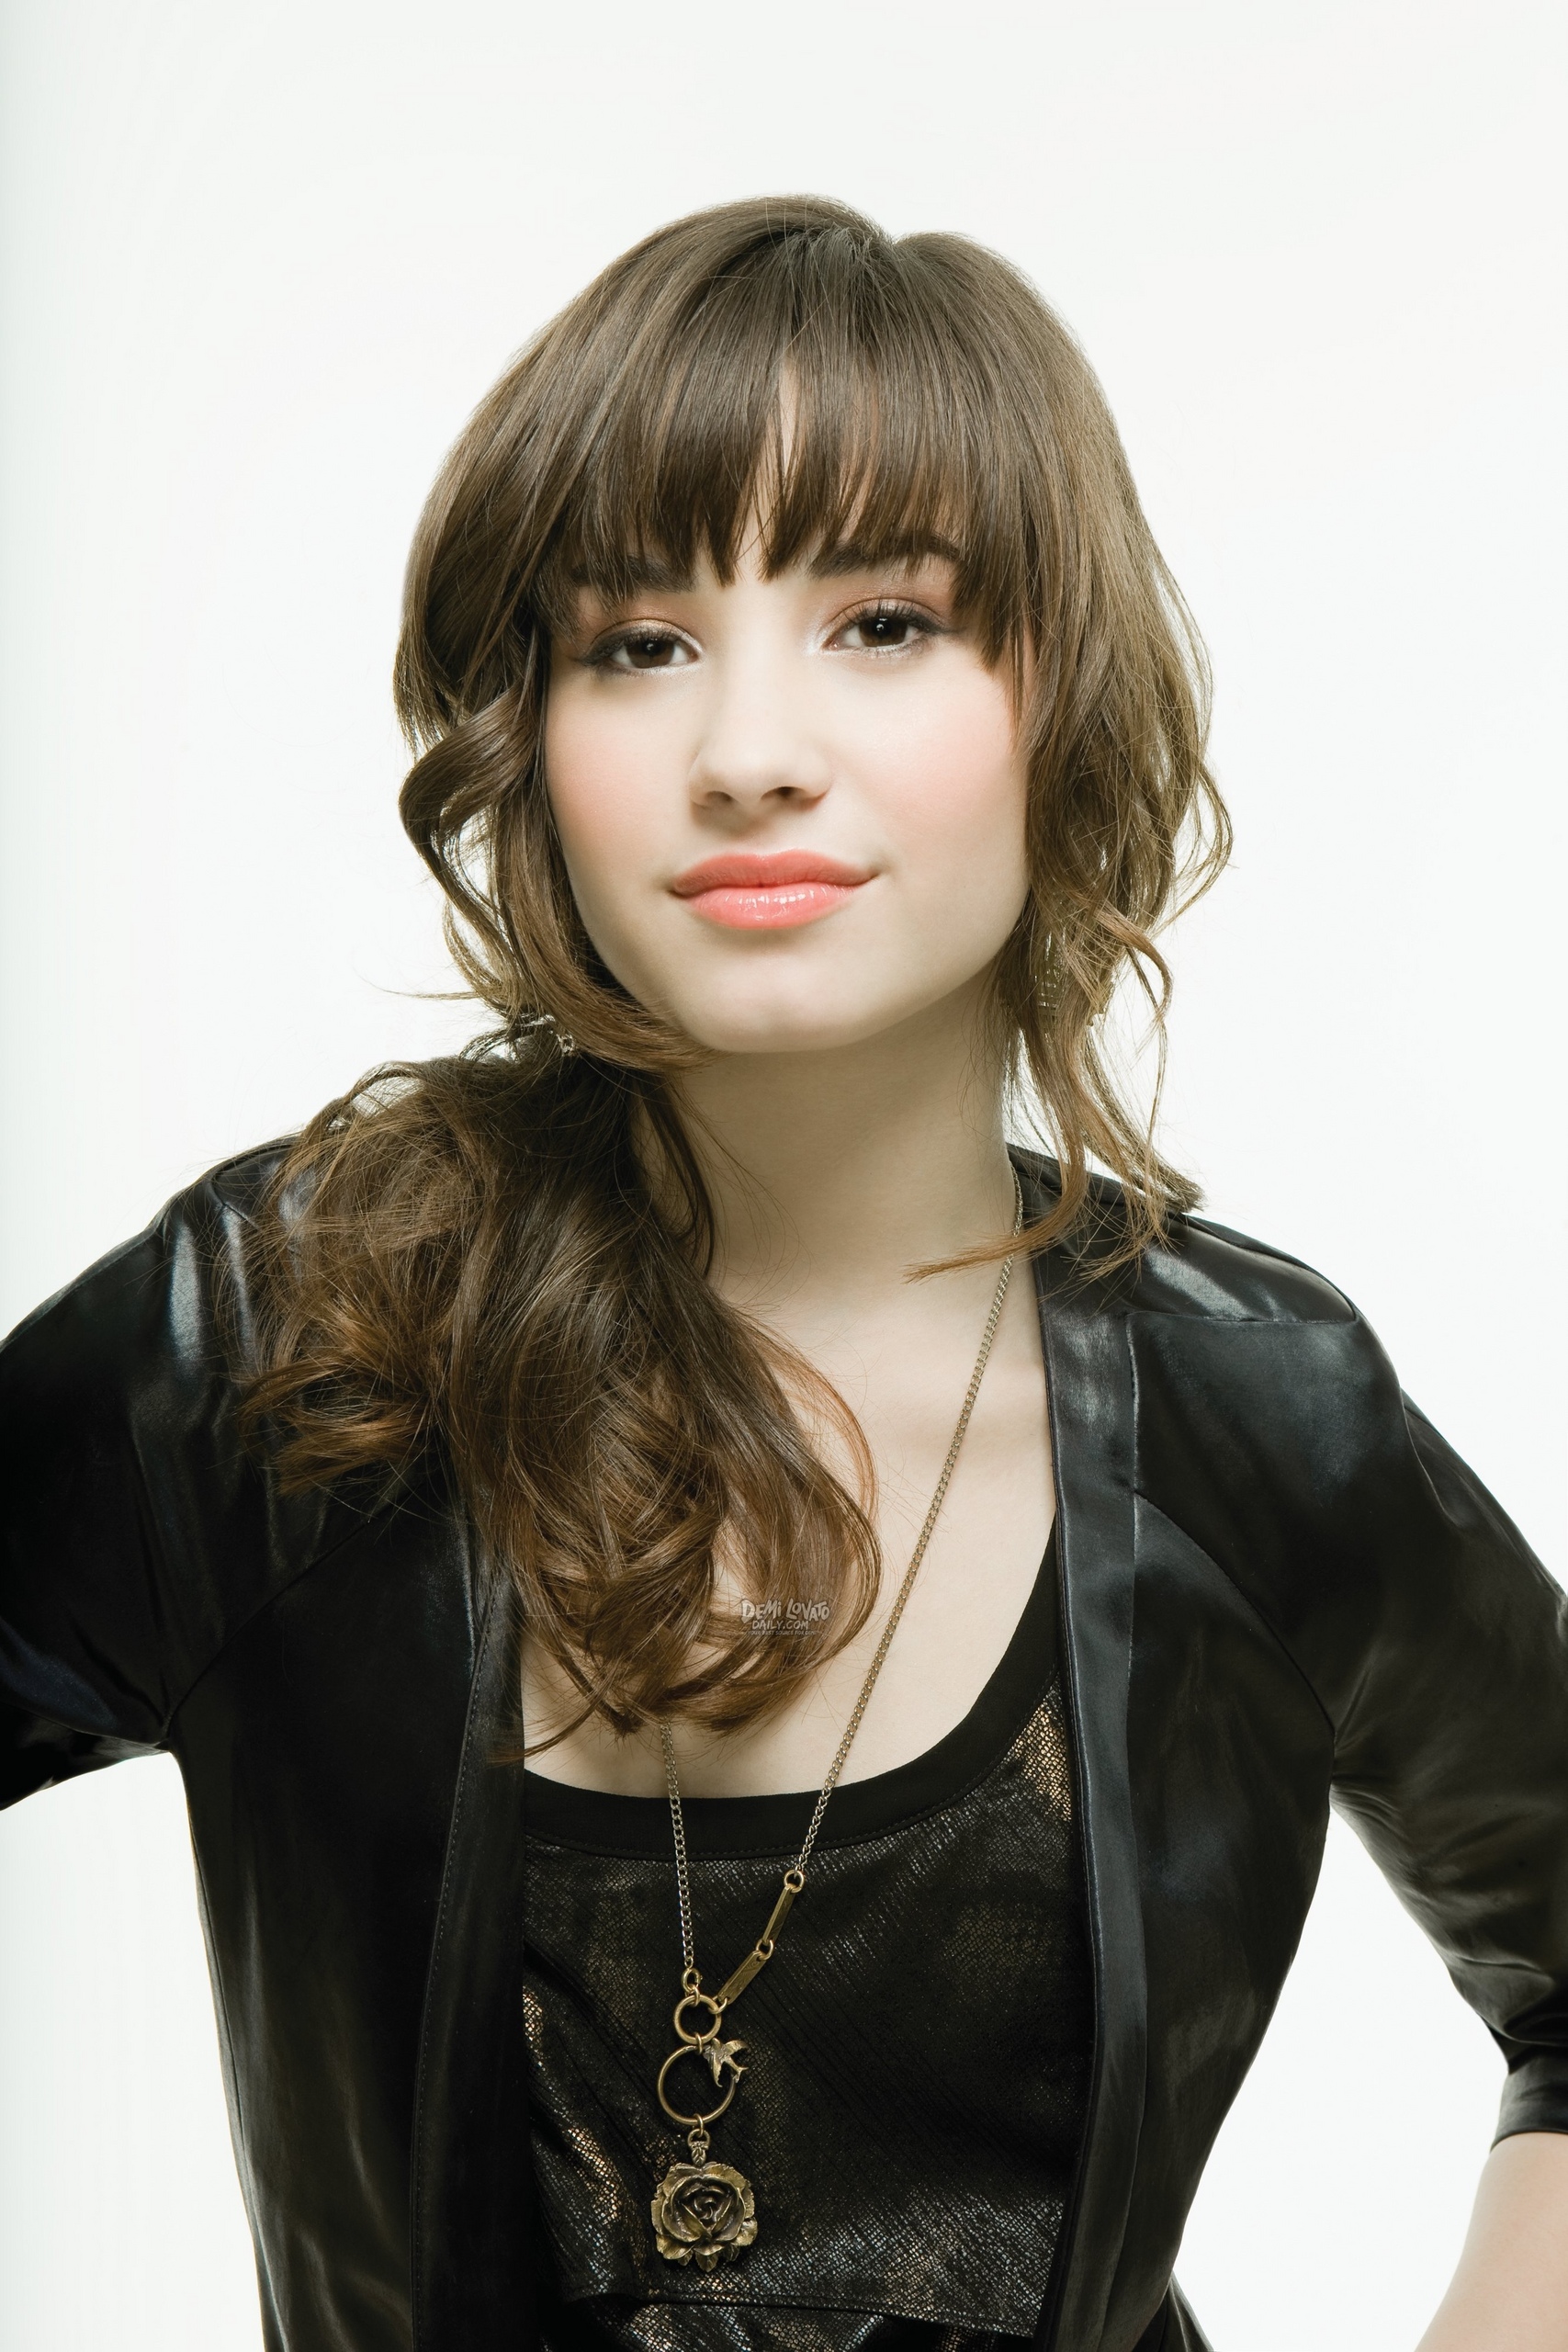 Demi-Lovato-S-Nields-2009-for-Don-t-Forget-Deluxe-Edition-album-photoshoot-anichu90-16786344-1707-2560